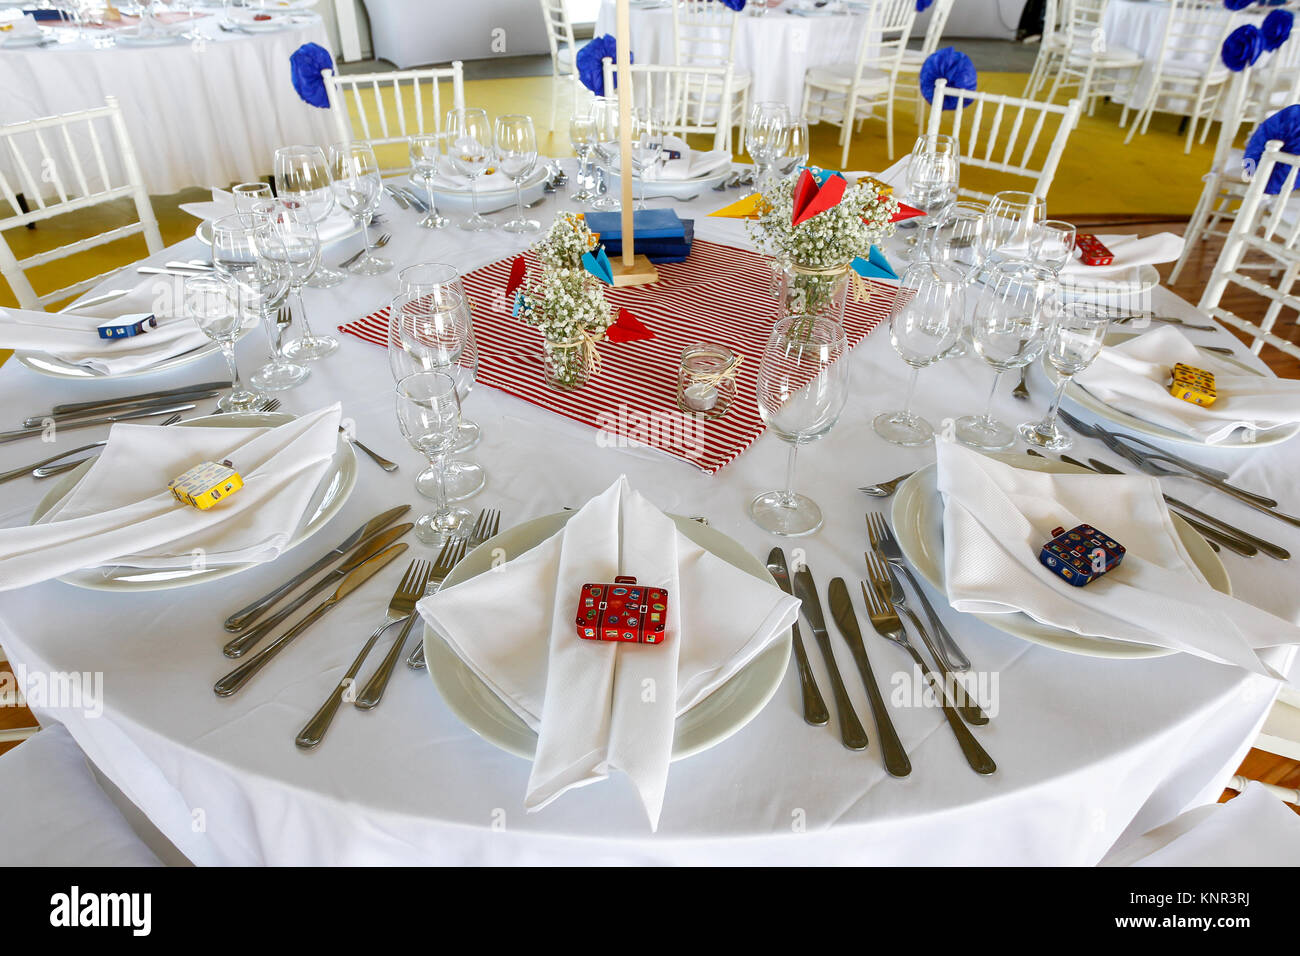 Circle dinner table served with white crockery and decorated with colorful objects. Stock Photo